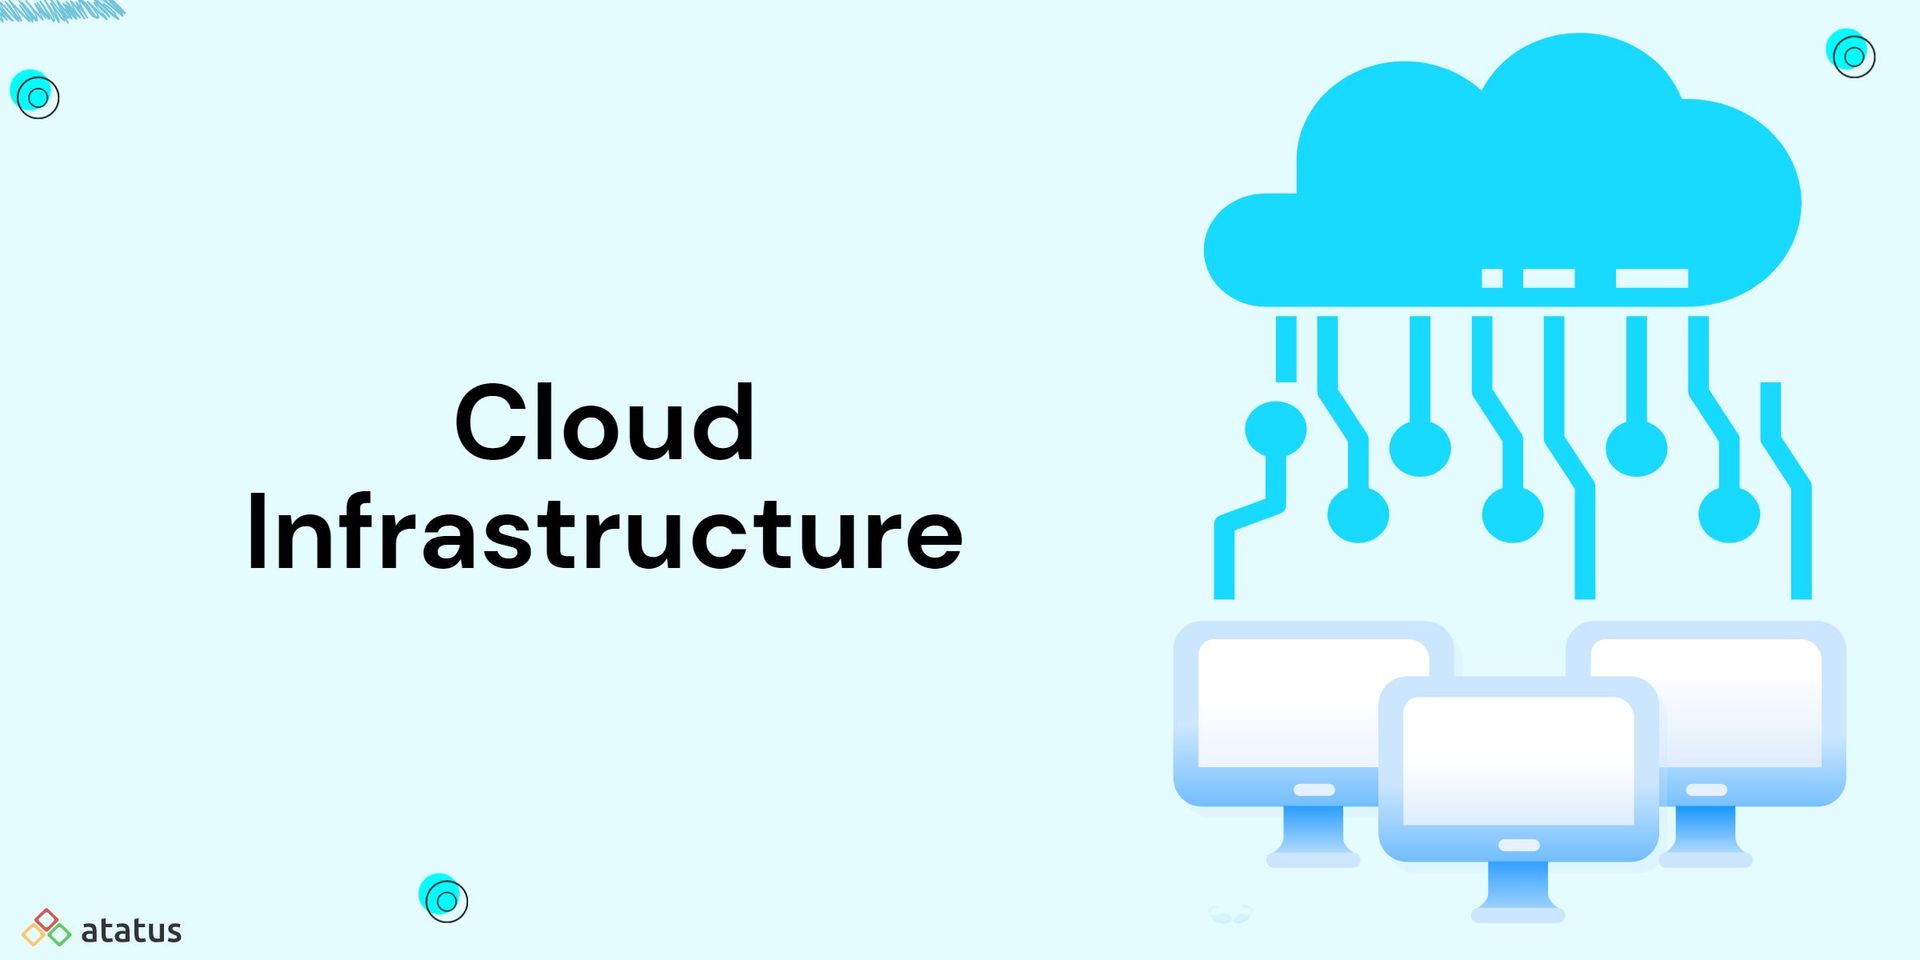 Cloud Infrastructure: Definition, Components, Benefits &More